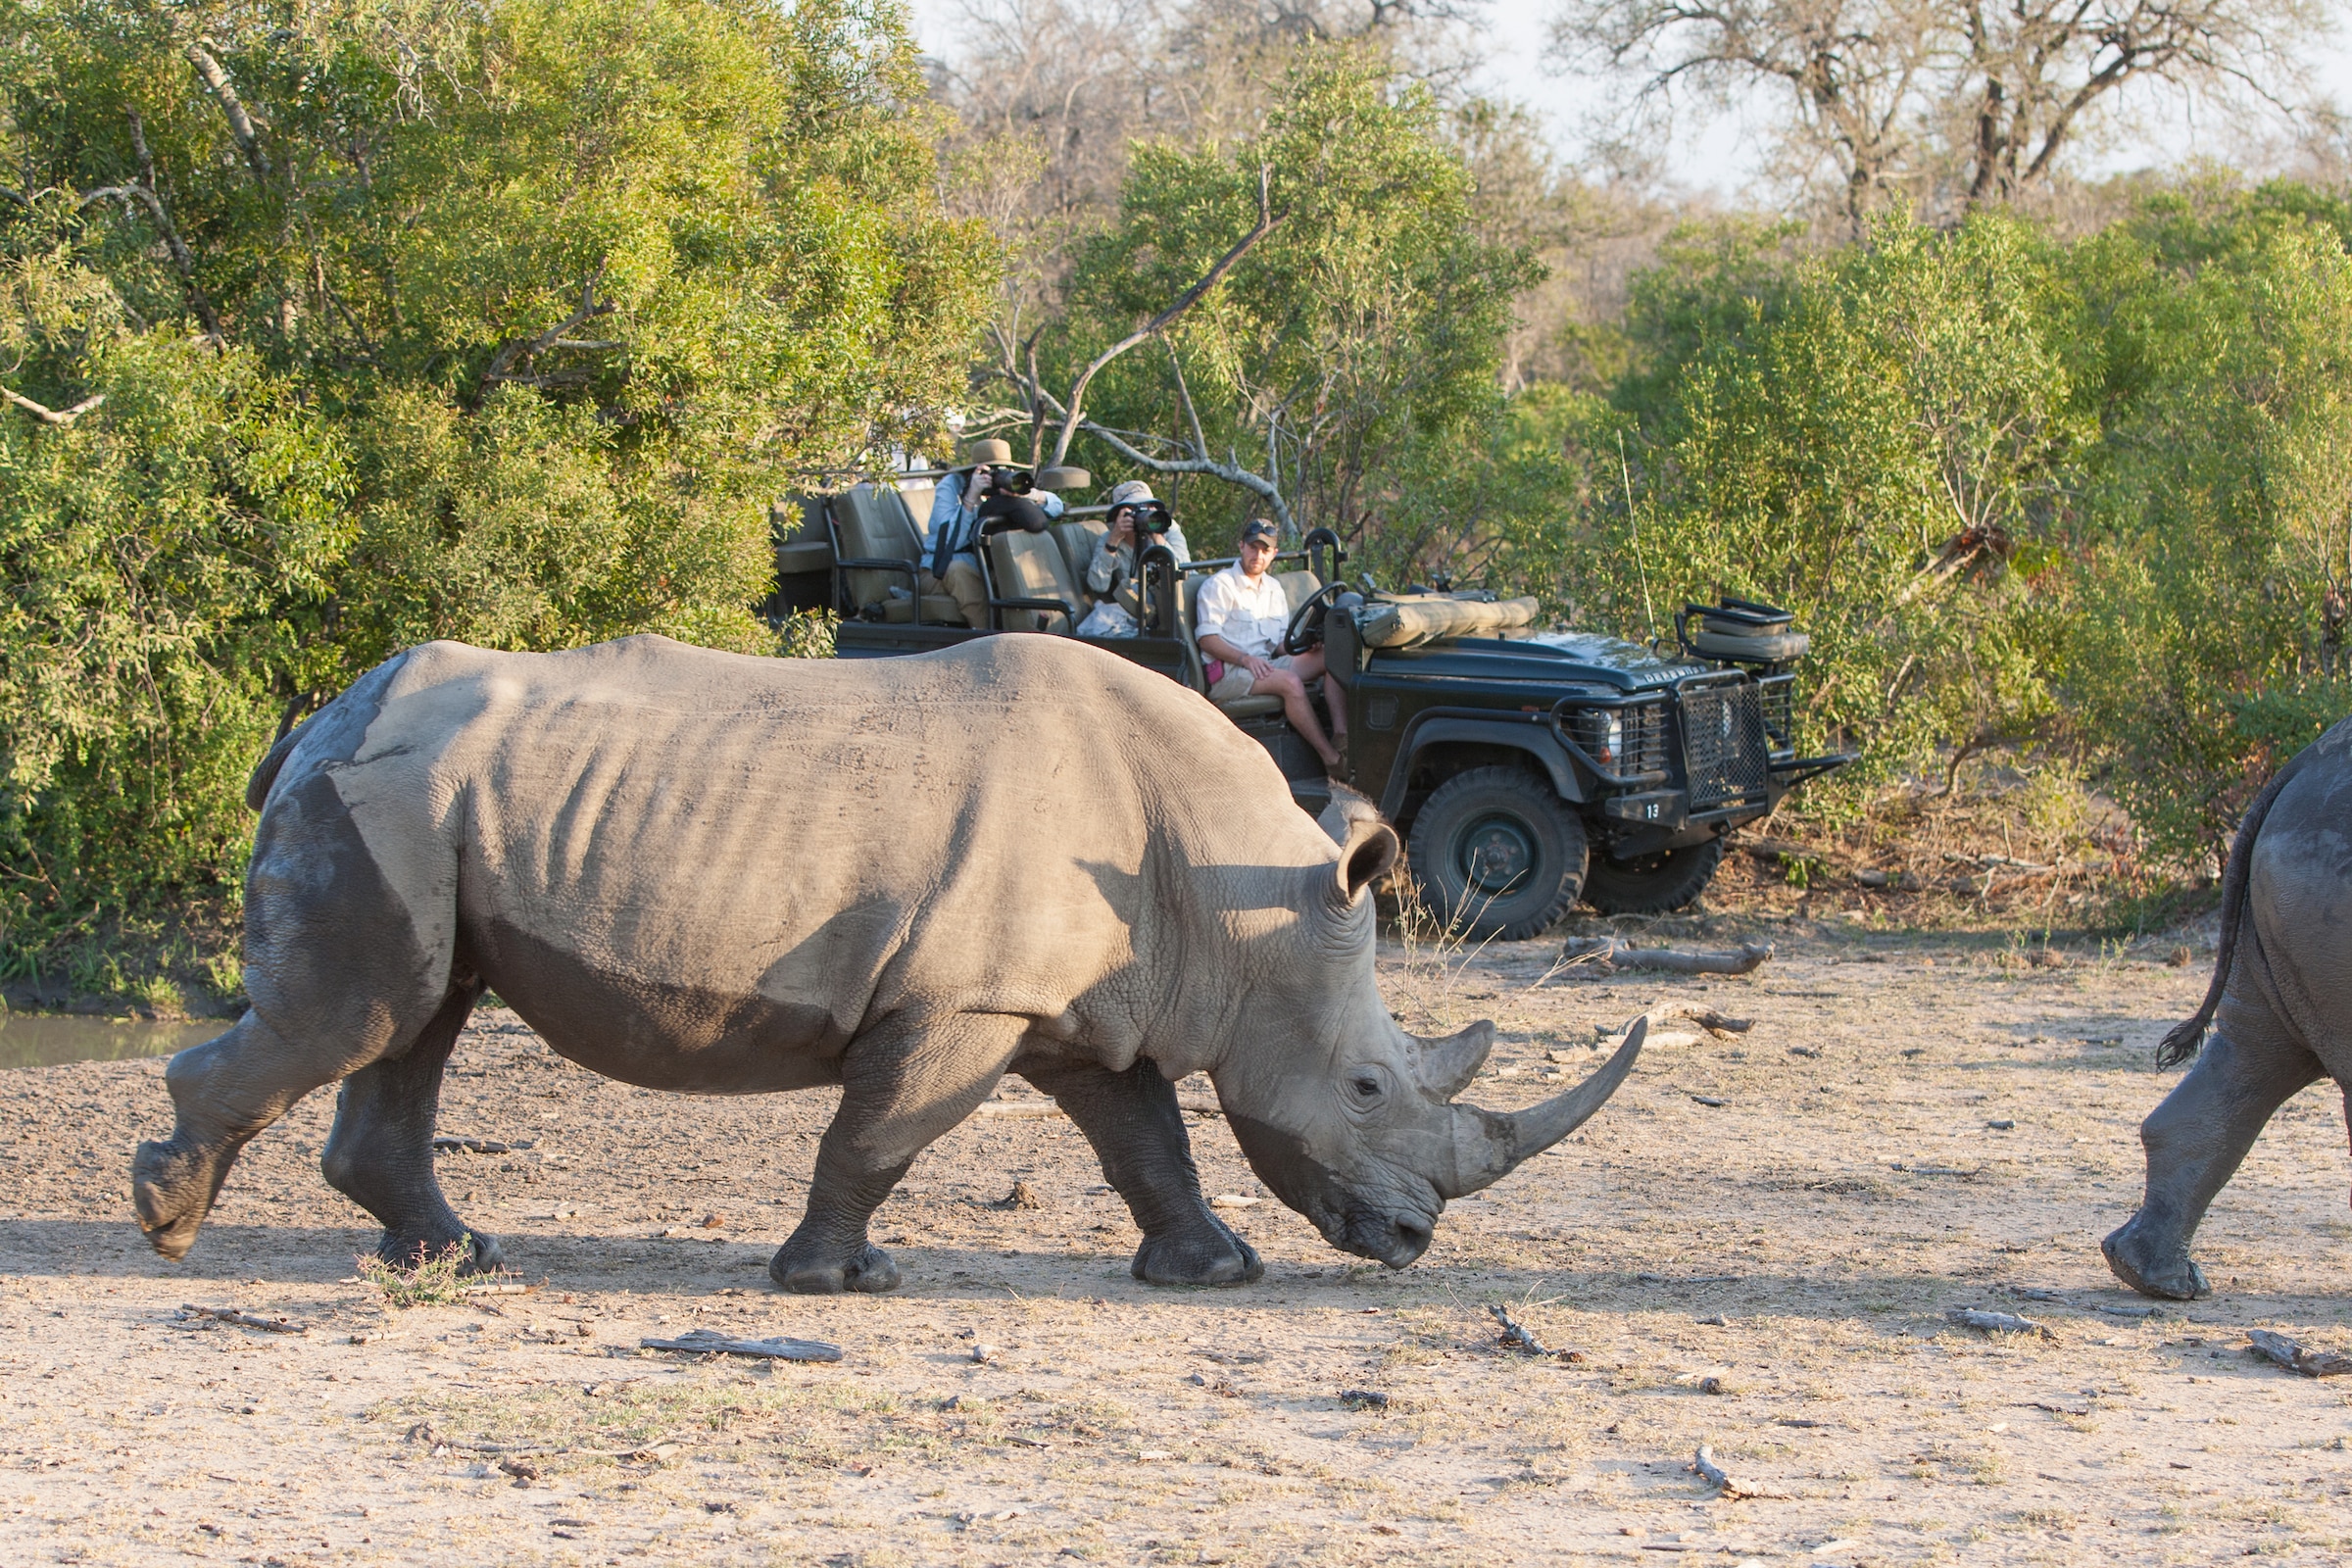 White rhino being watched by tourists on safari in South Africa